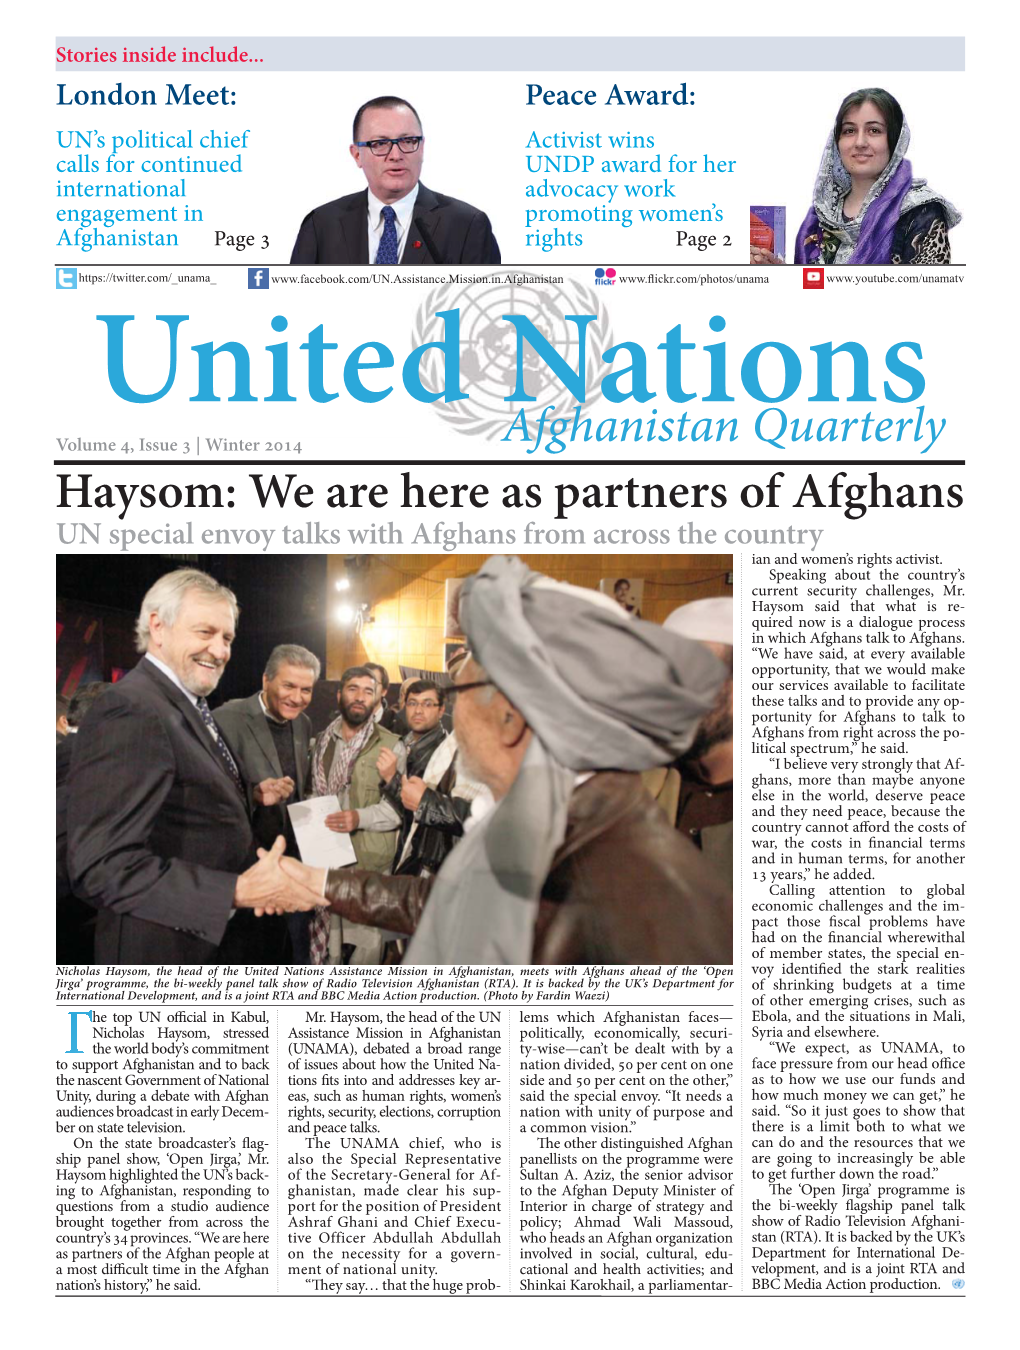 Afghanistan Quarterly Haysom: We Are Here As Partners of Afghans UN Special Envoy Talks with Afghans from Across the Country Ian and Women’S Rights Activist